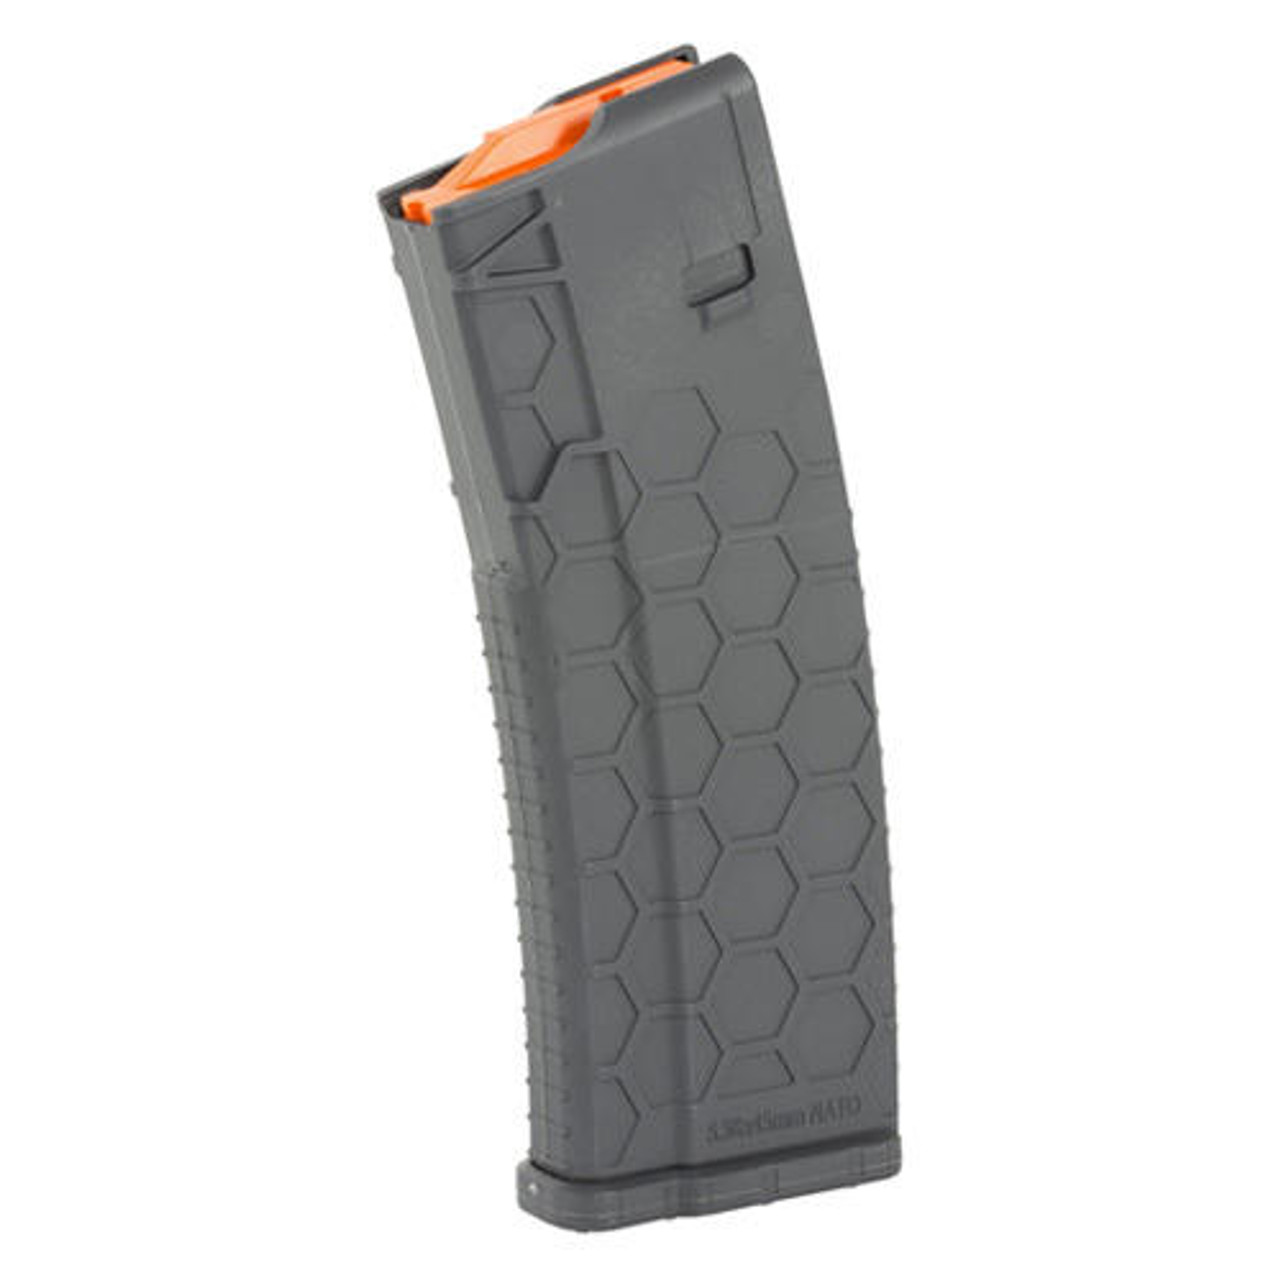 AR 15 Magazines | Large Selection | Quick Shipping